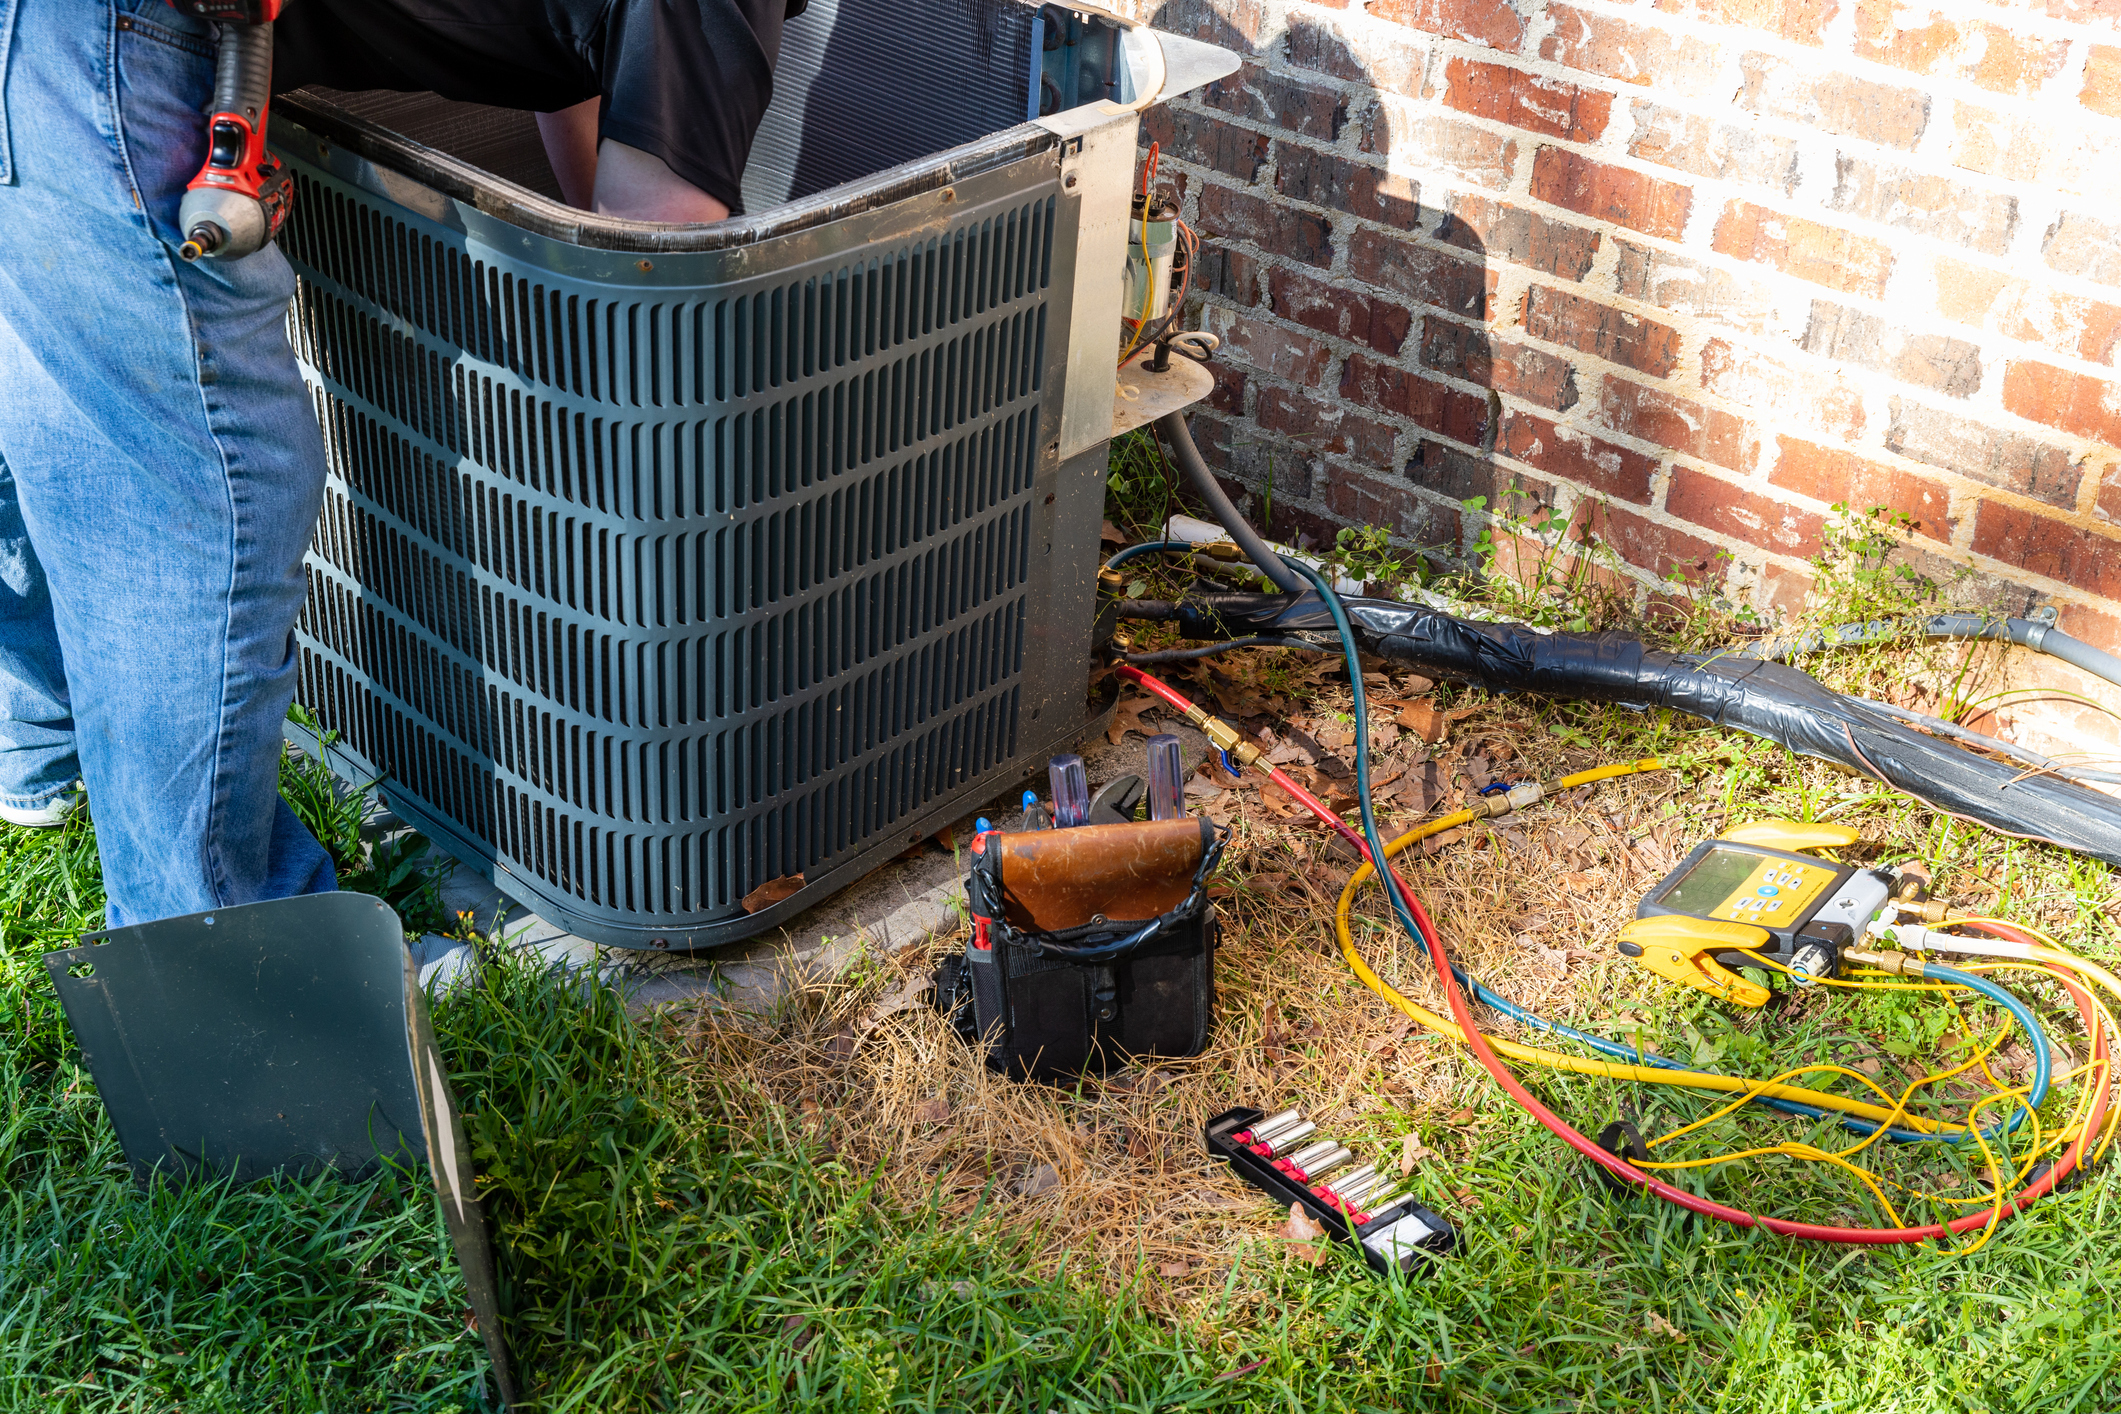 Maintenance being performed on outdoor air conditioning unit